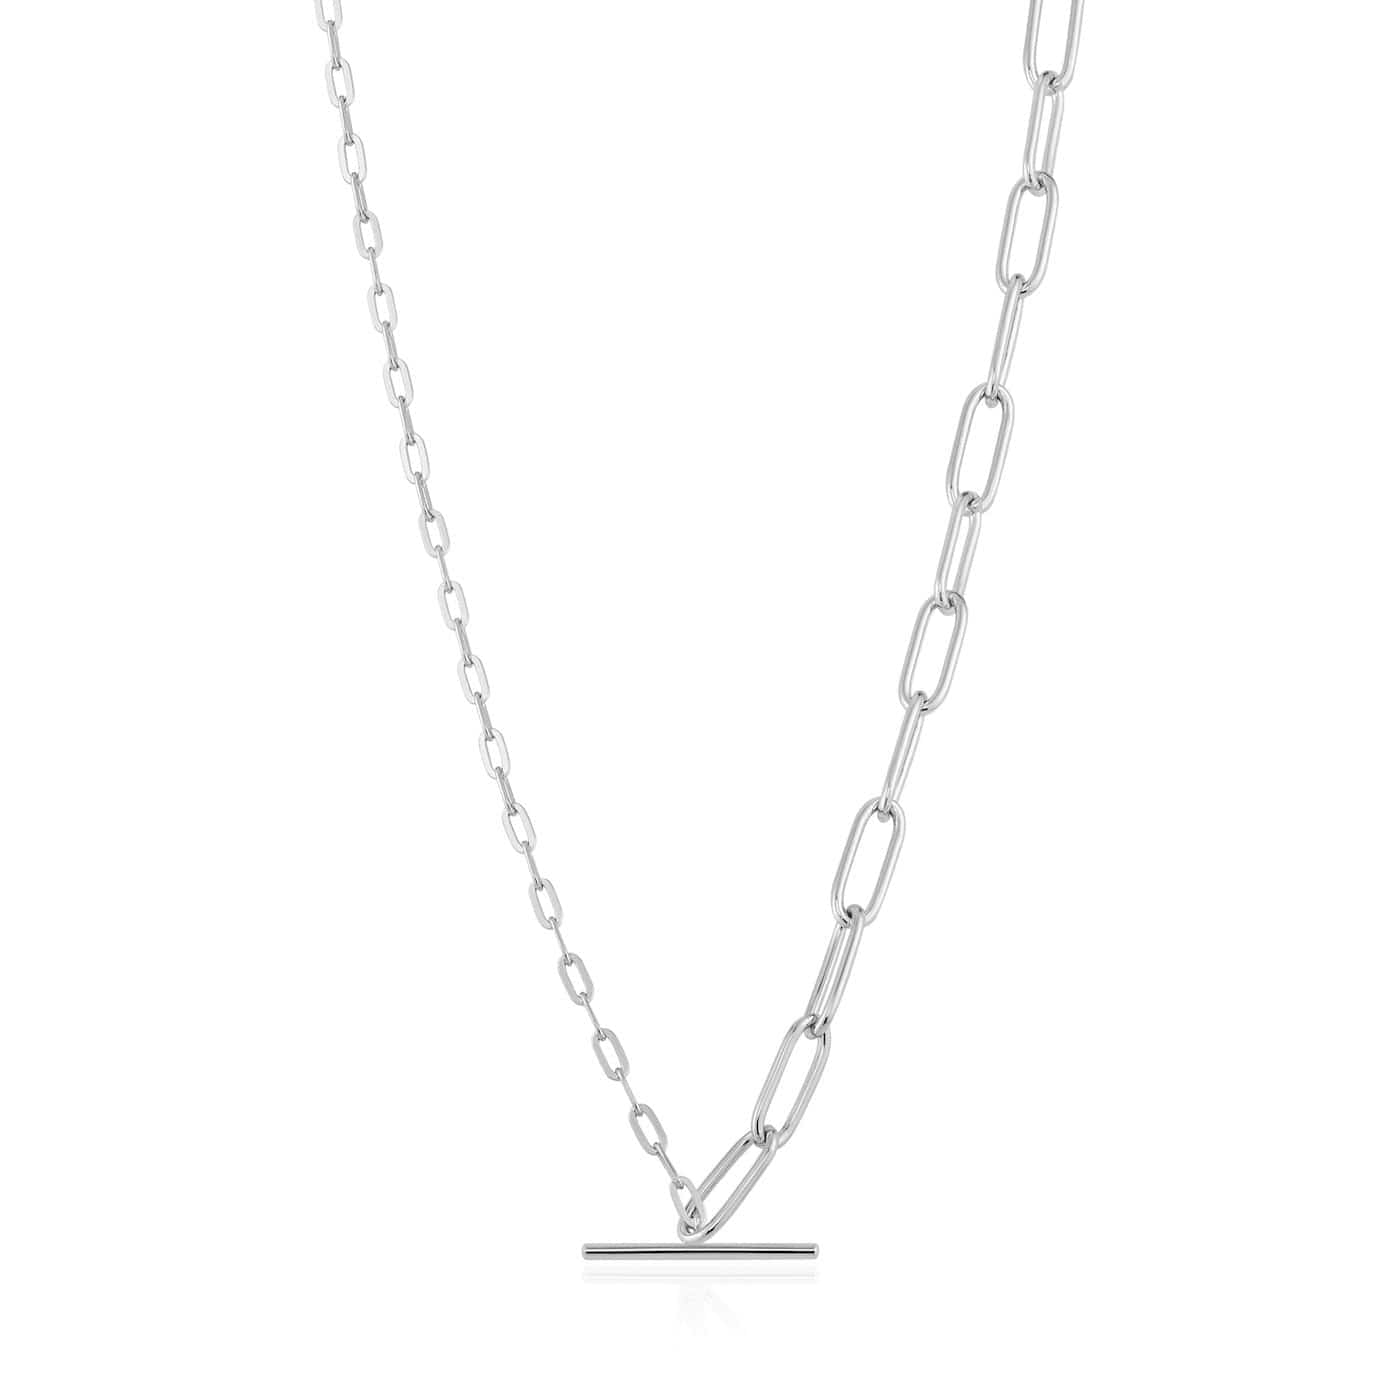 NKL Silver Mixed Link T-bar Necklace